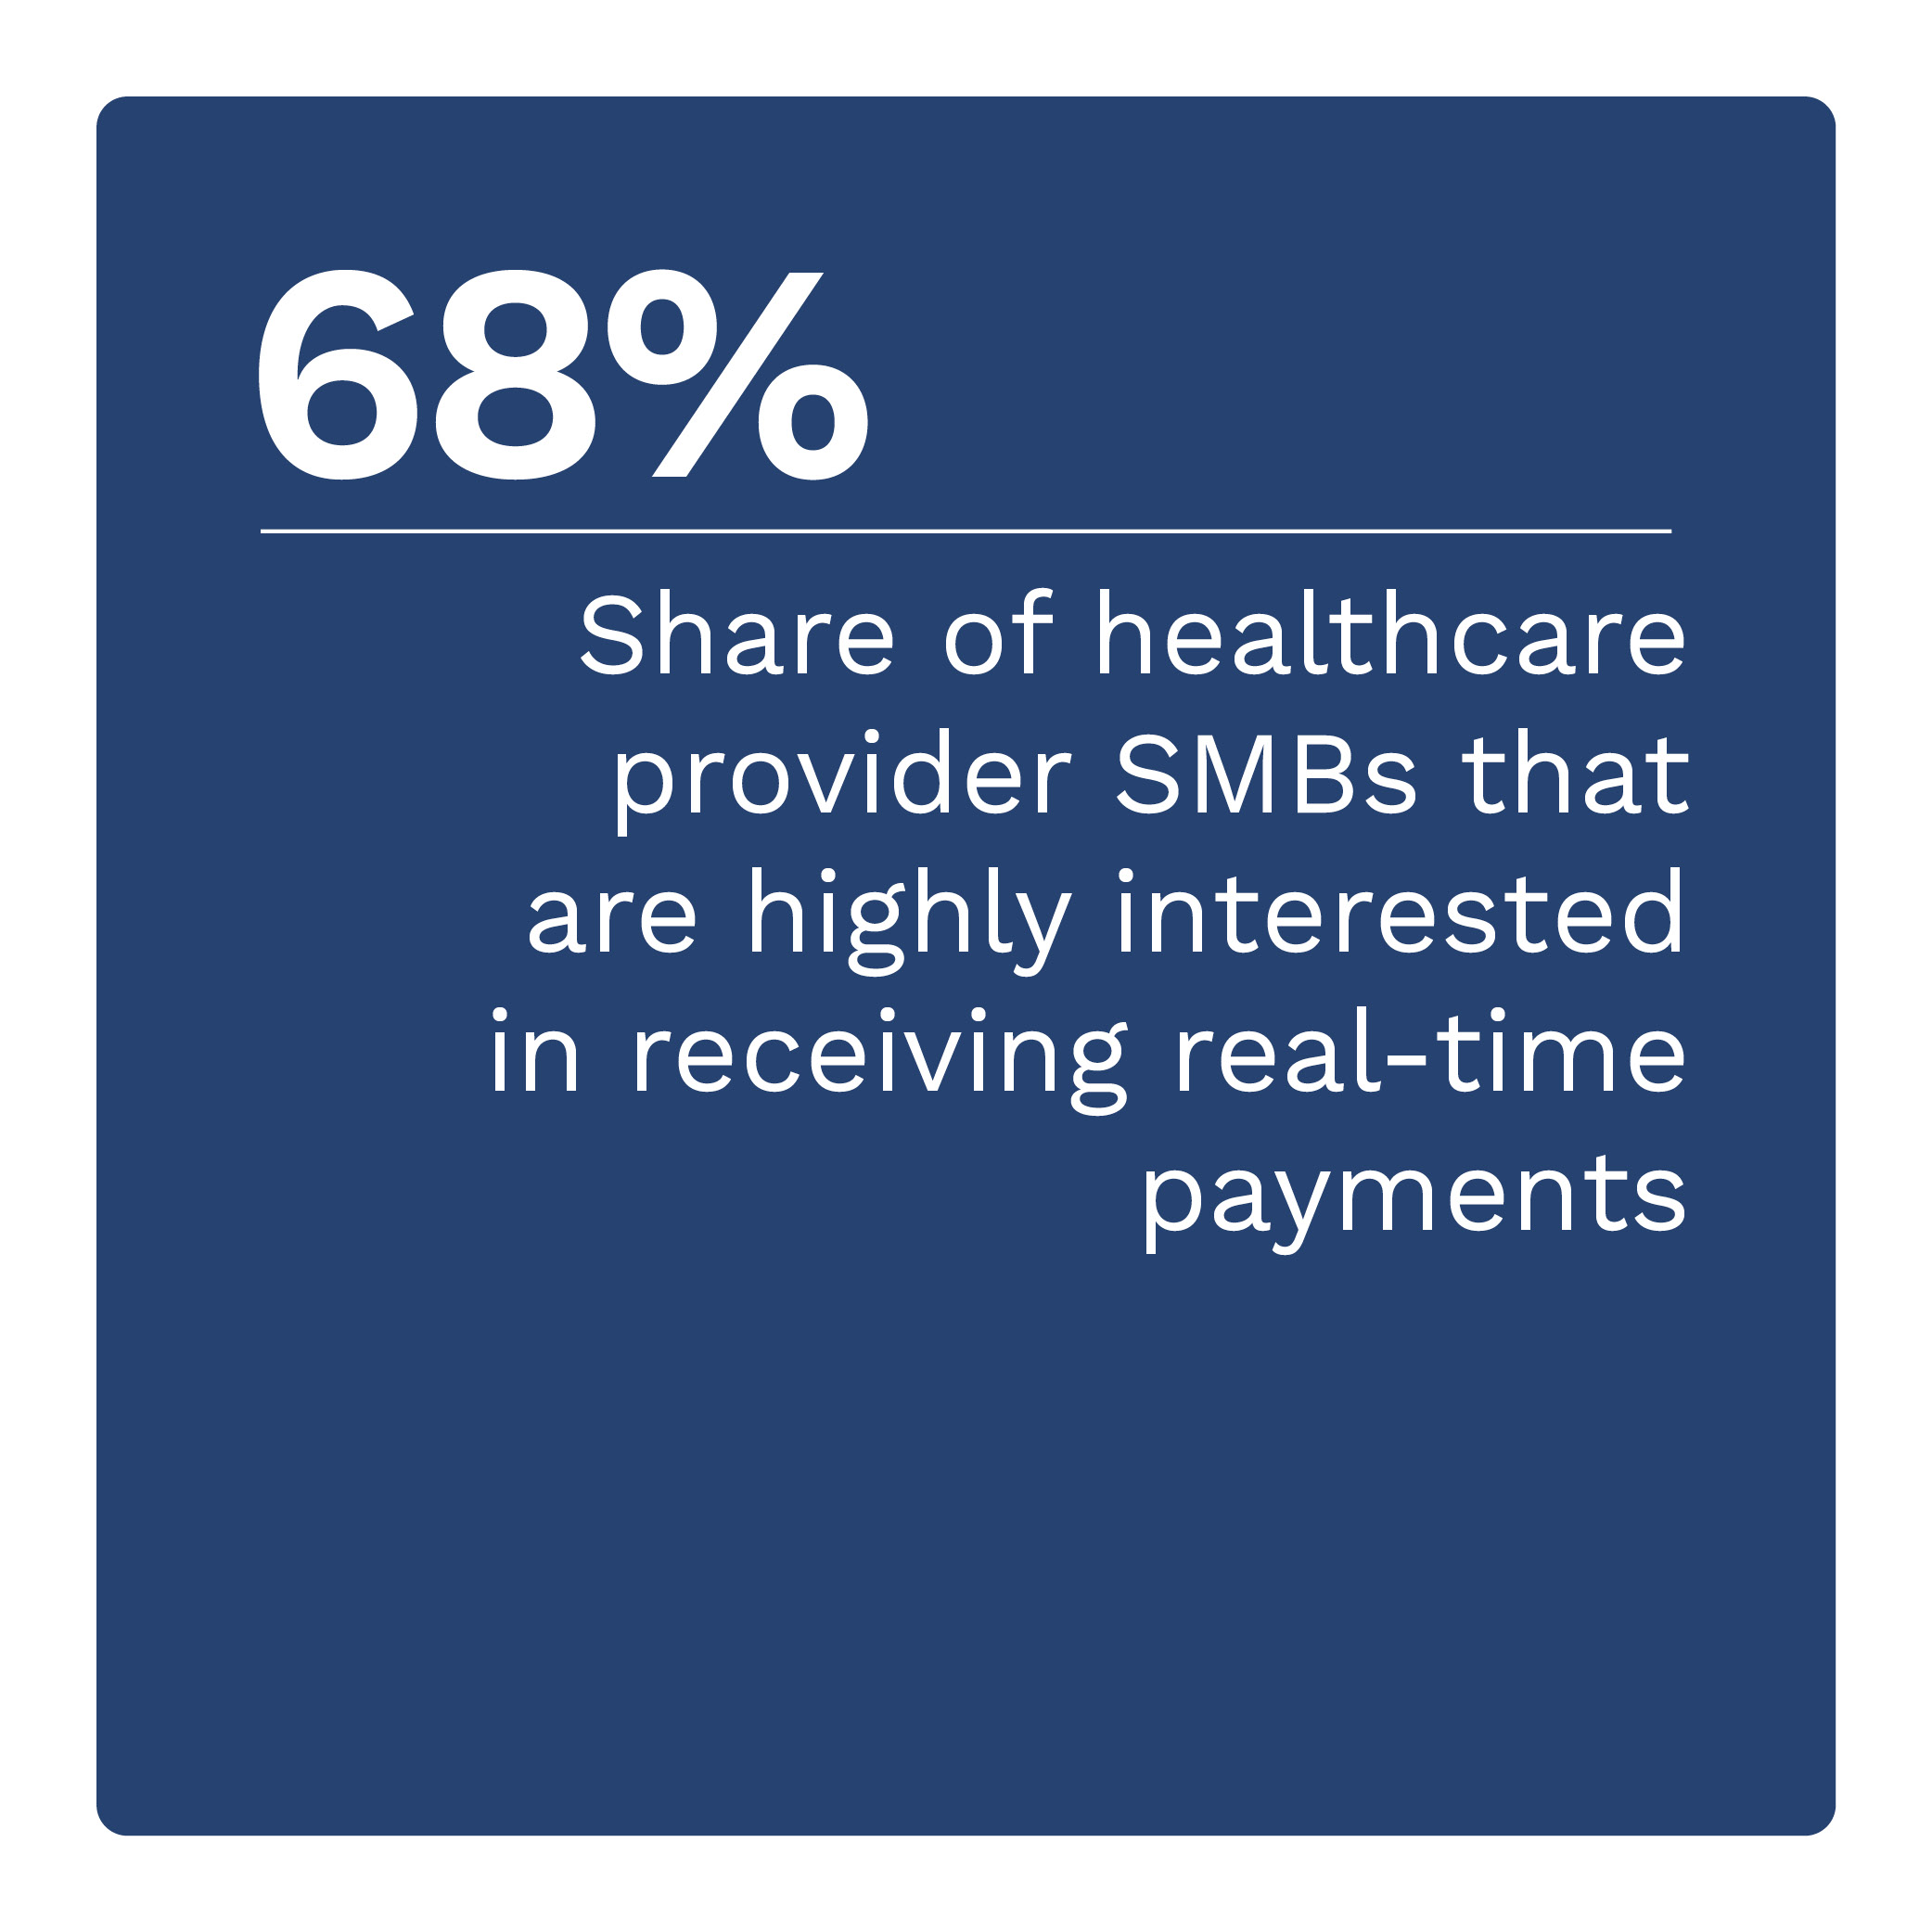  Share of healthcare provider SMBs that are highly interested in receiving real-time payments